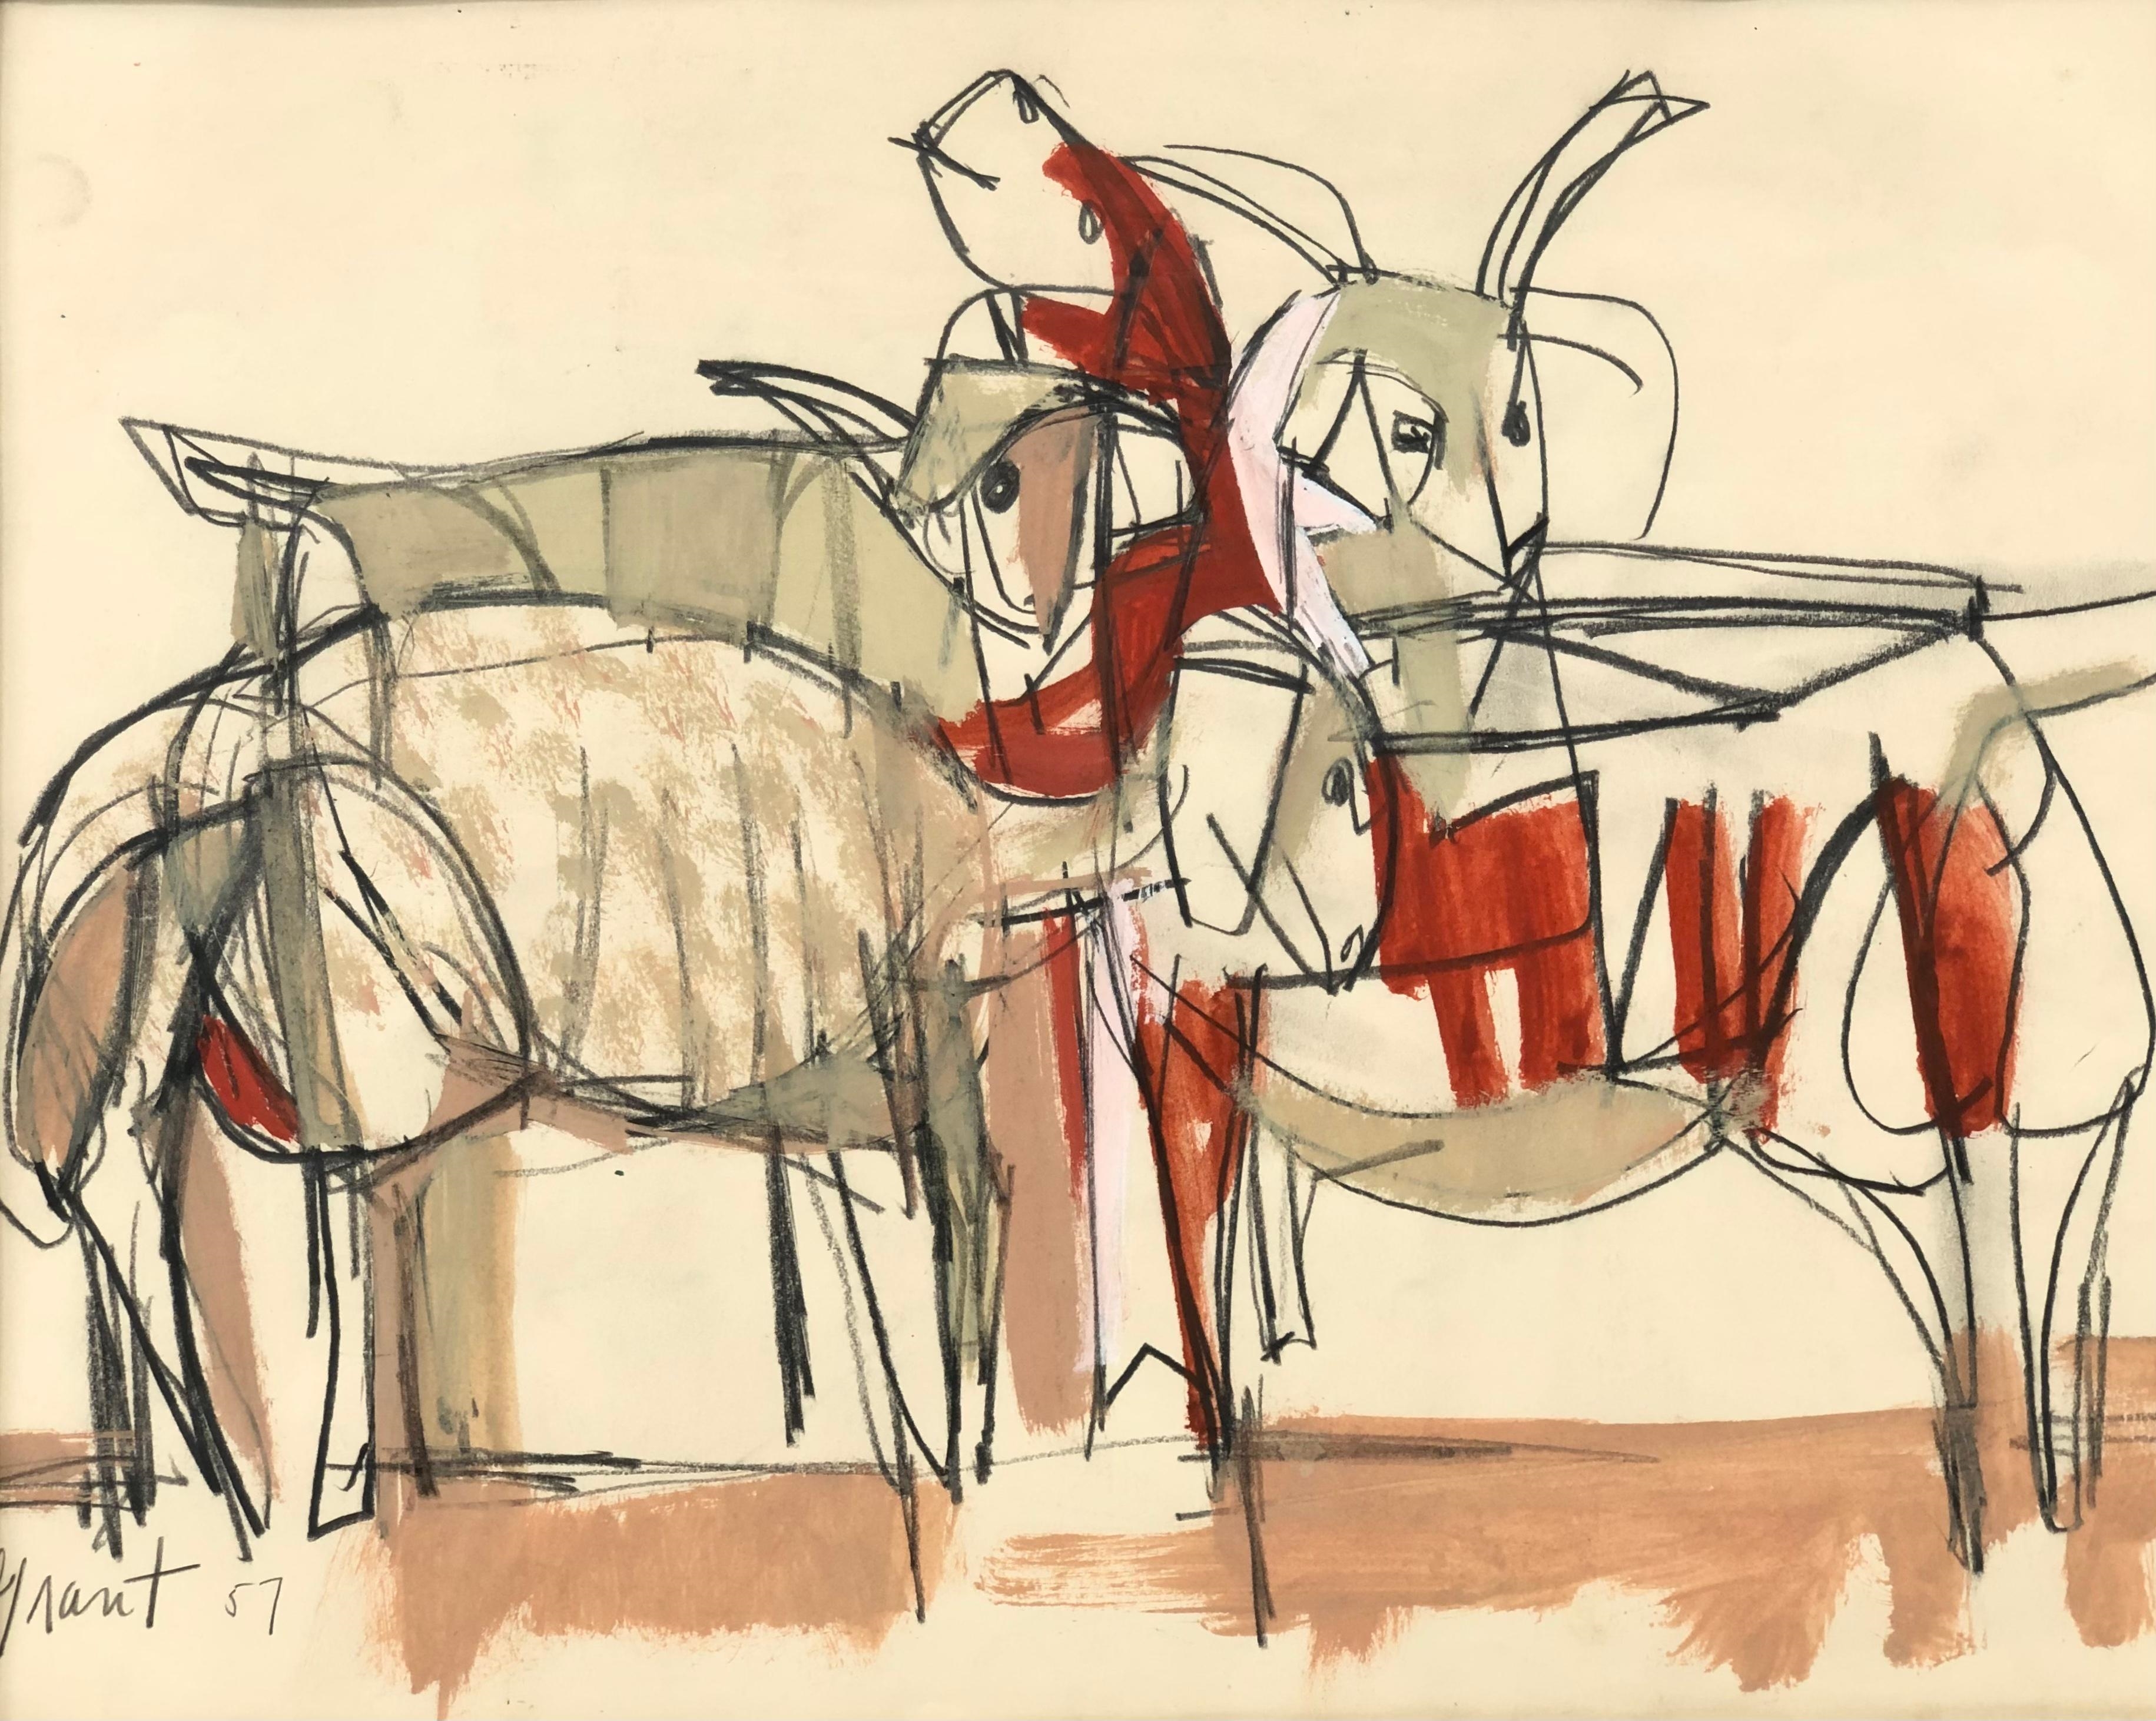 Artwork by James Edward Grant, "ABSTRACT GOATS", Made of Mixed Media on Paper